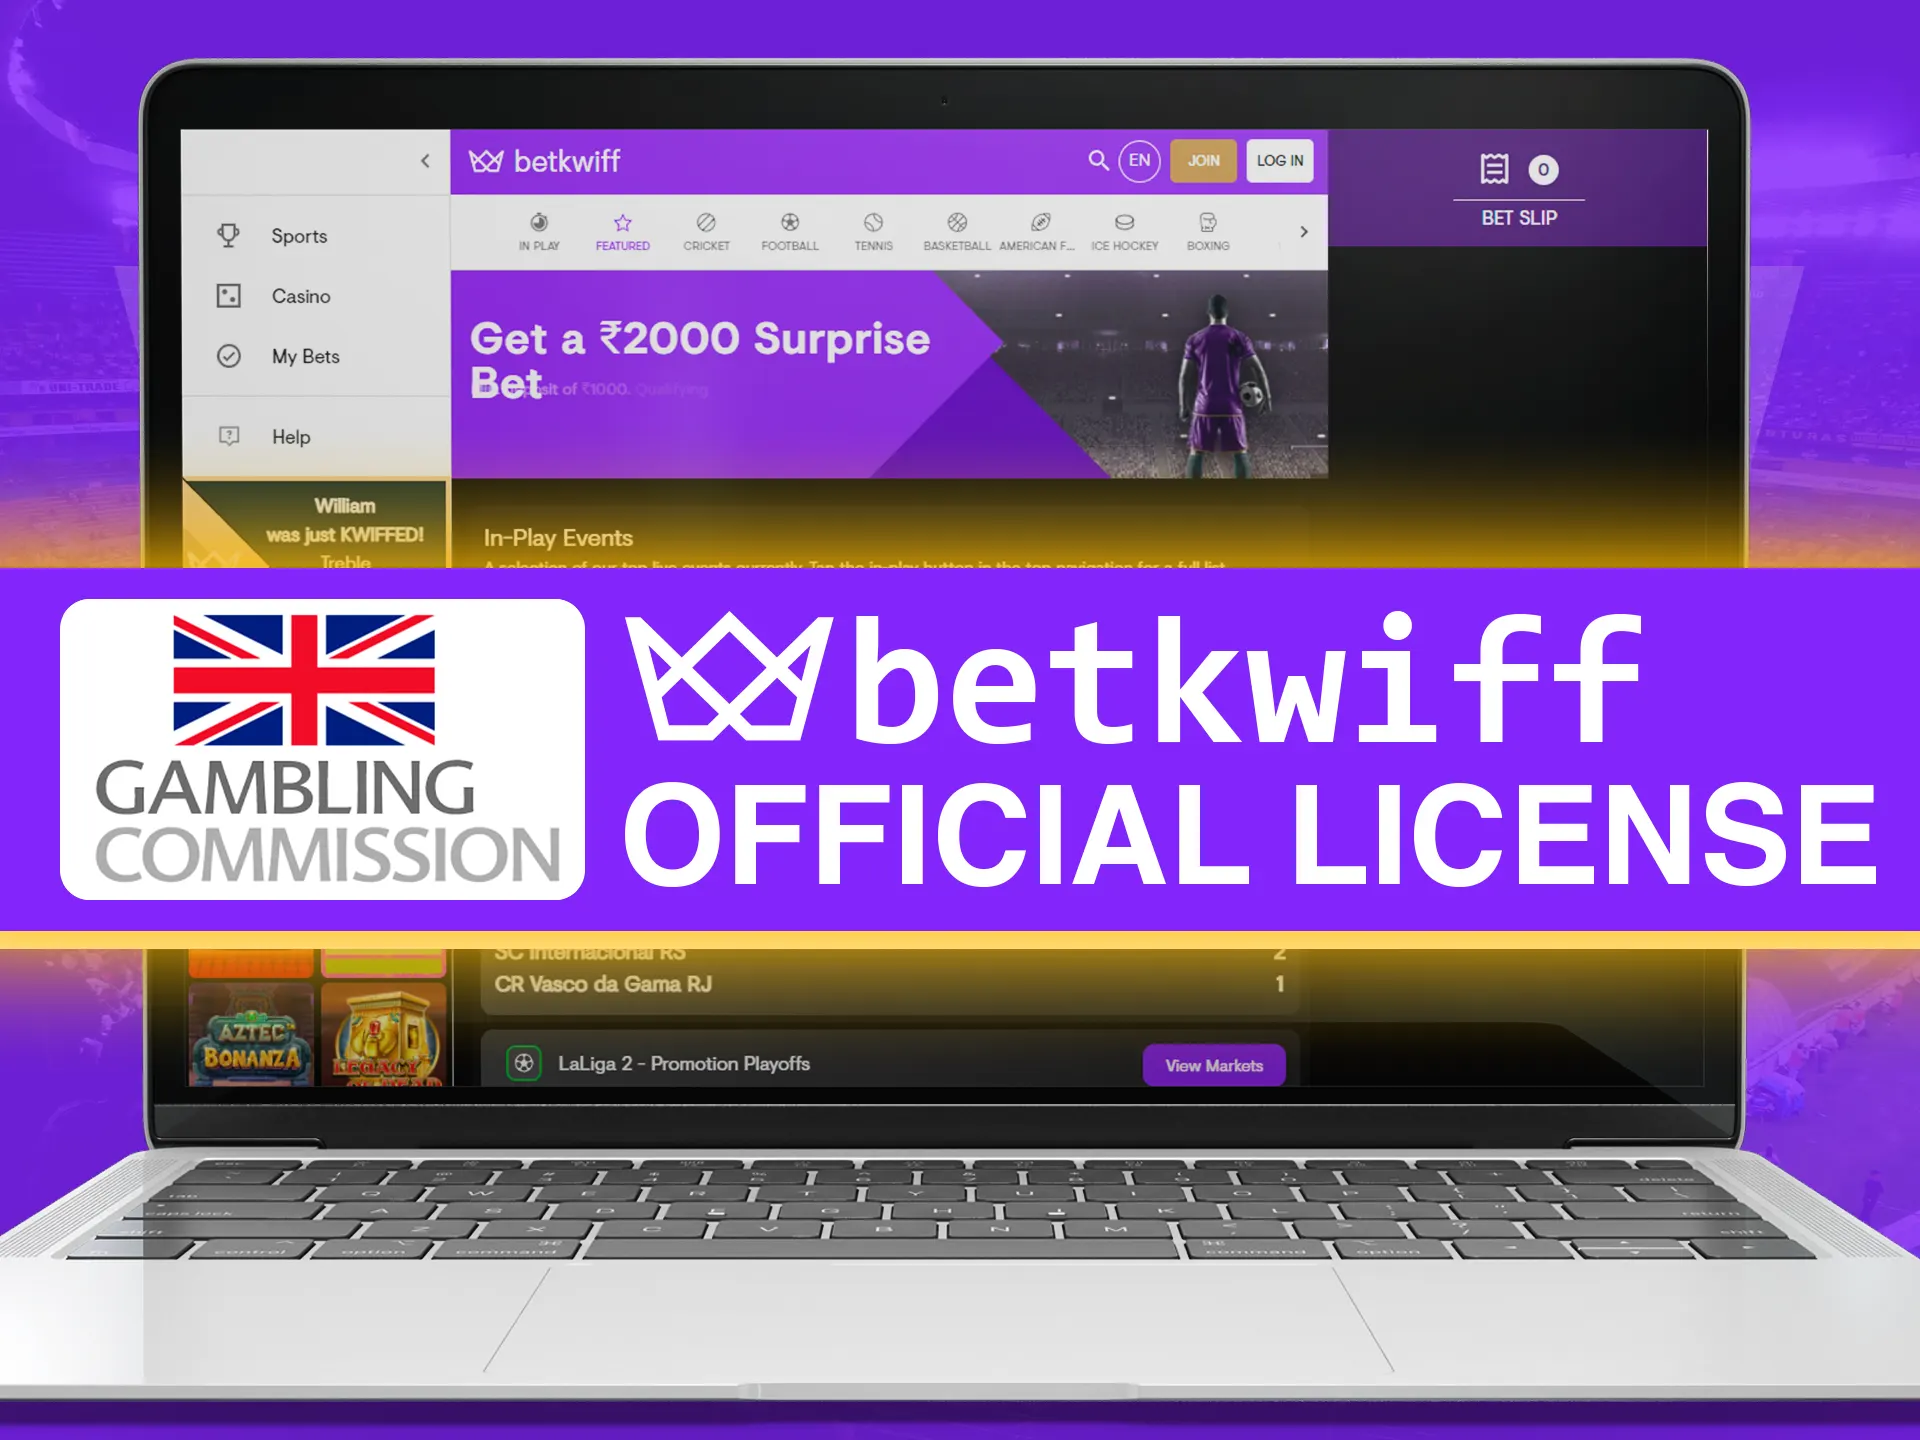 Betkwiff is officially licensed and legal.